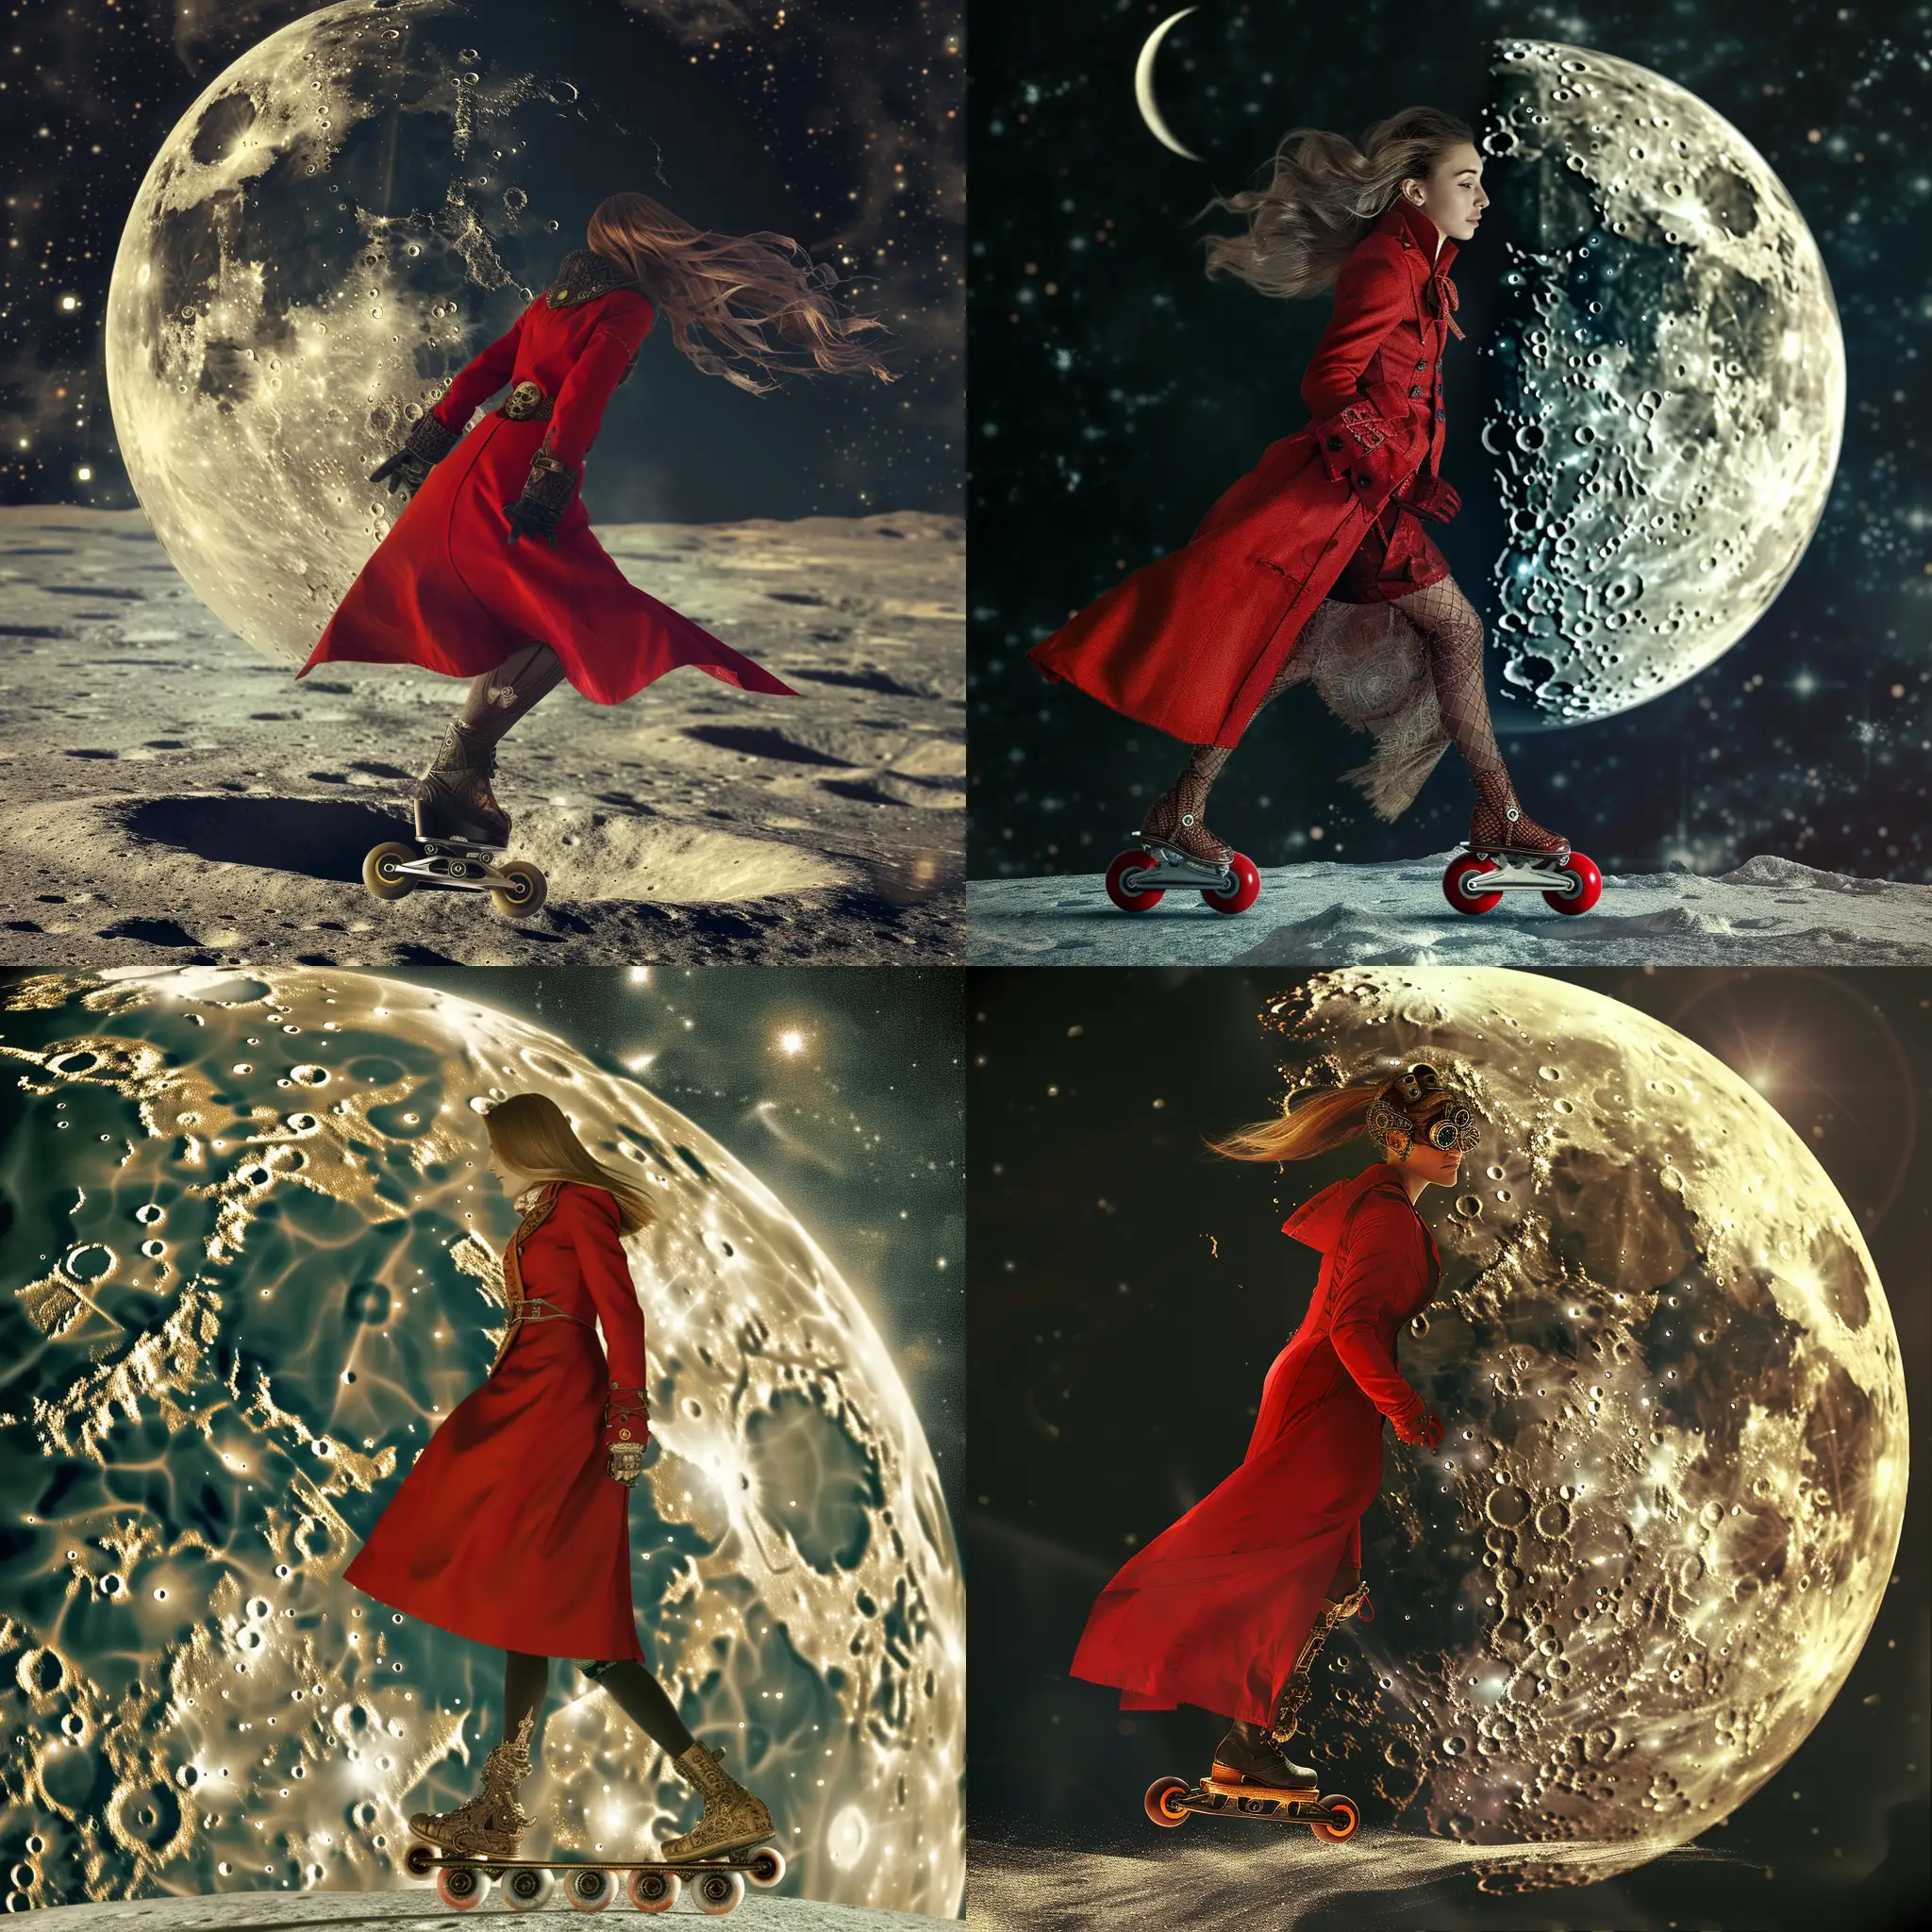 Steampunk-Woman-Roller-Skating-on-the-Moon-in-Red-Coat-Ethereal-Surreal-Fantasy-Art